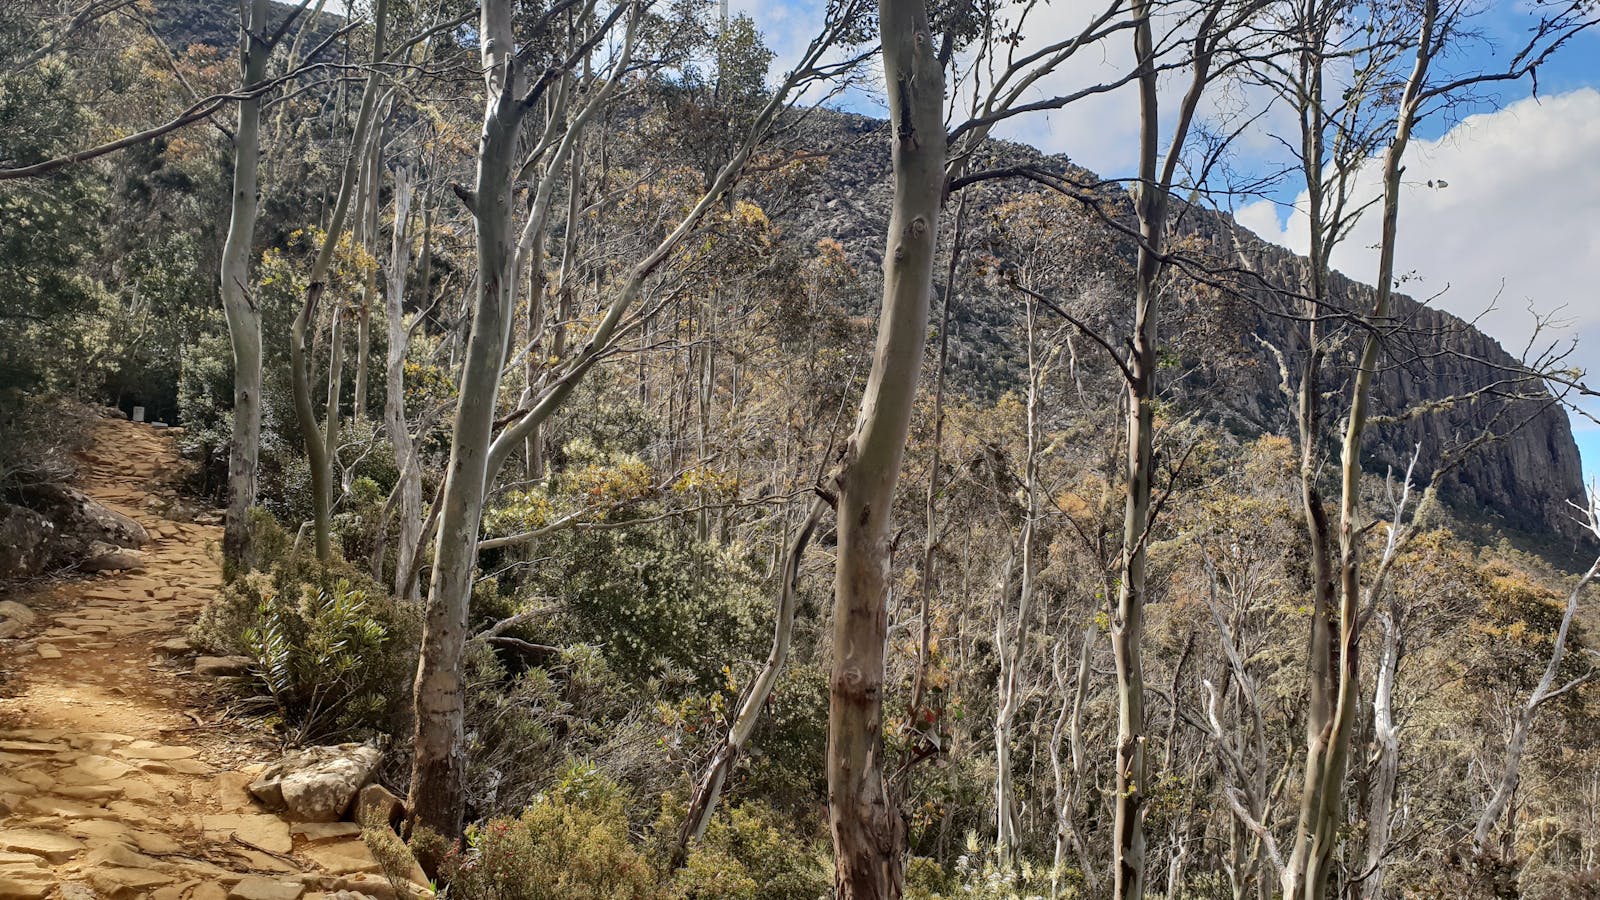 The Organ Pipes and Summit looming large on the track ahead